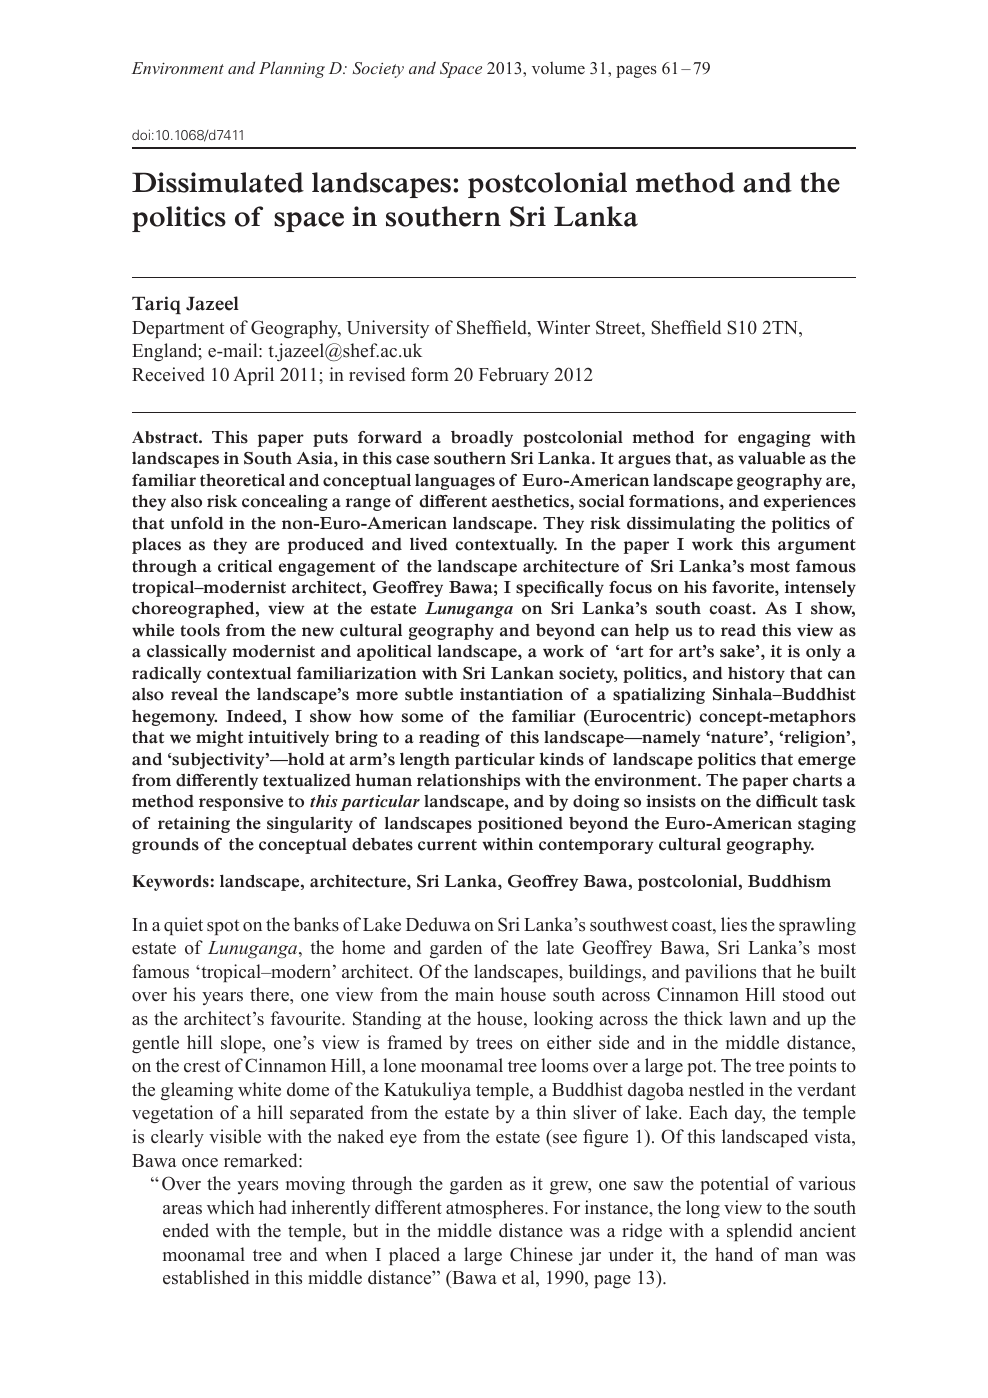 Dissimulated Landscapes Postcolonial Method And The Politics Of Space In Southern Sri Lanka Topic Of Research Paper In Social And Economic Geography Download Scholarly Article Pdf And Read For Free On